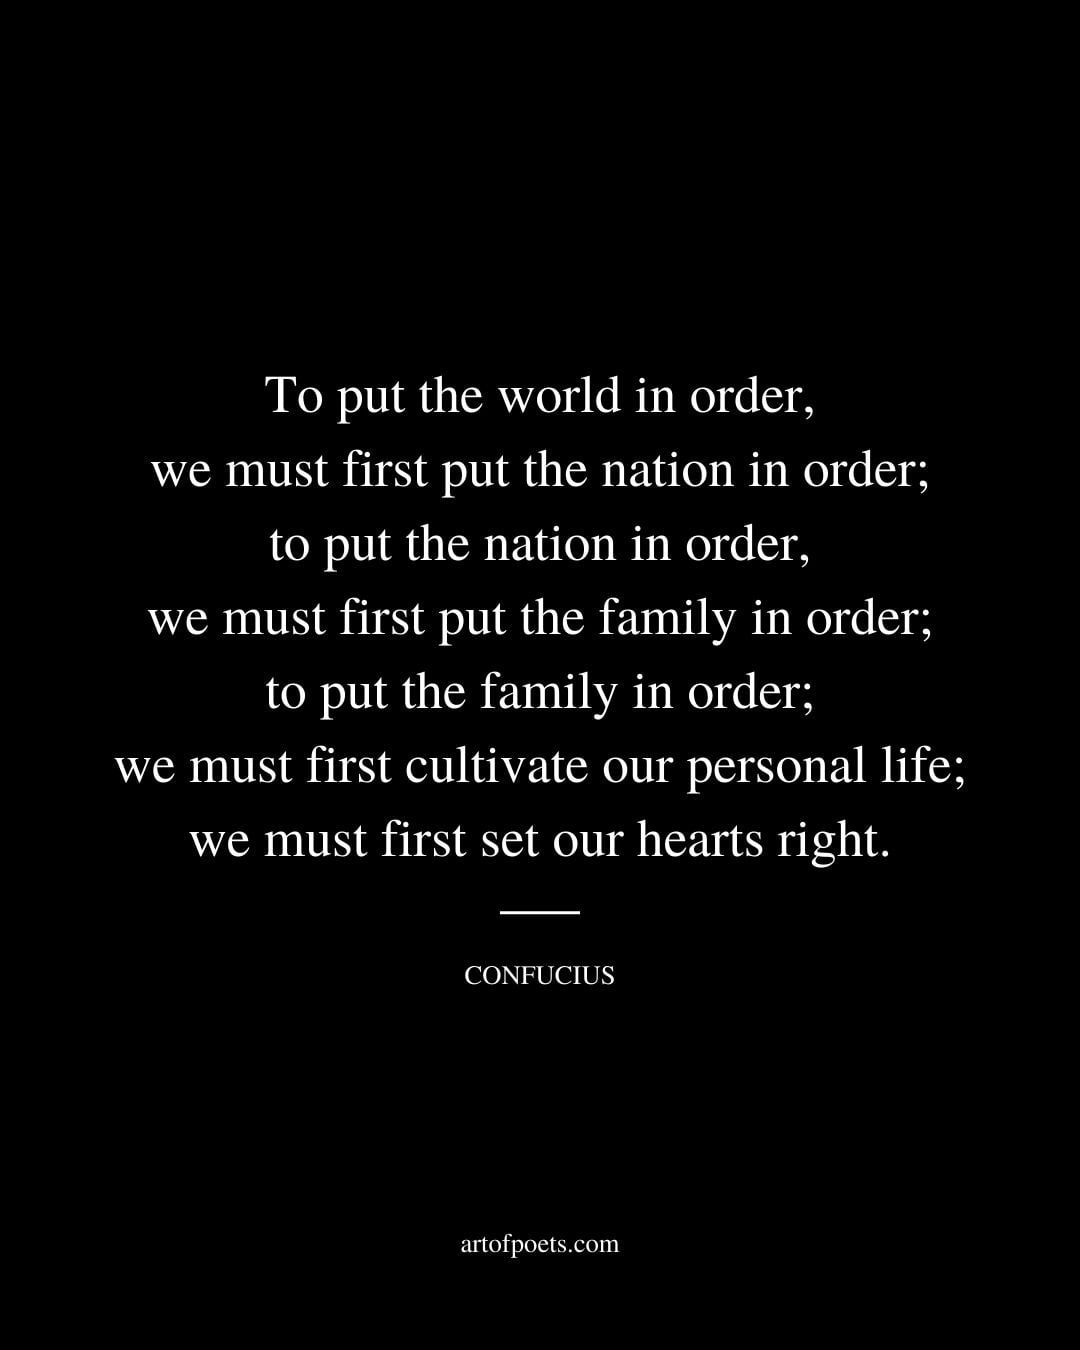 To put the world in order we must first put the nation in order to put the nation in order we must first put the family in order